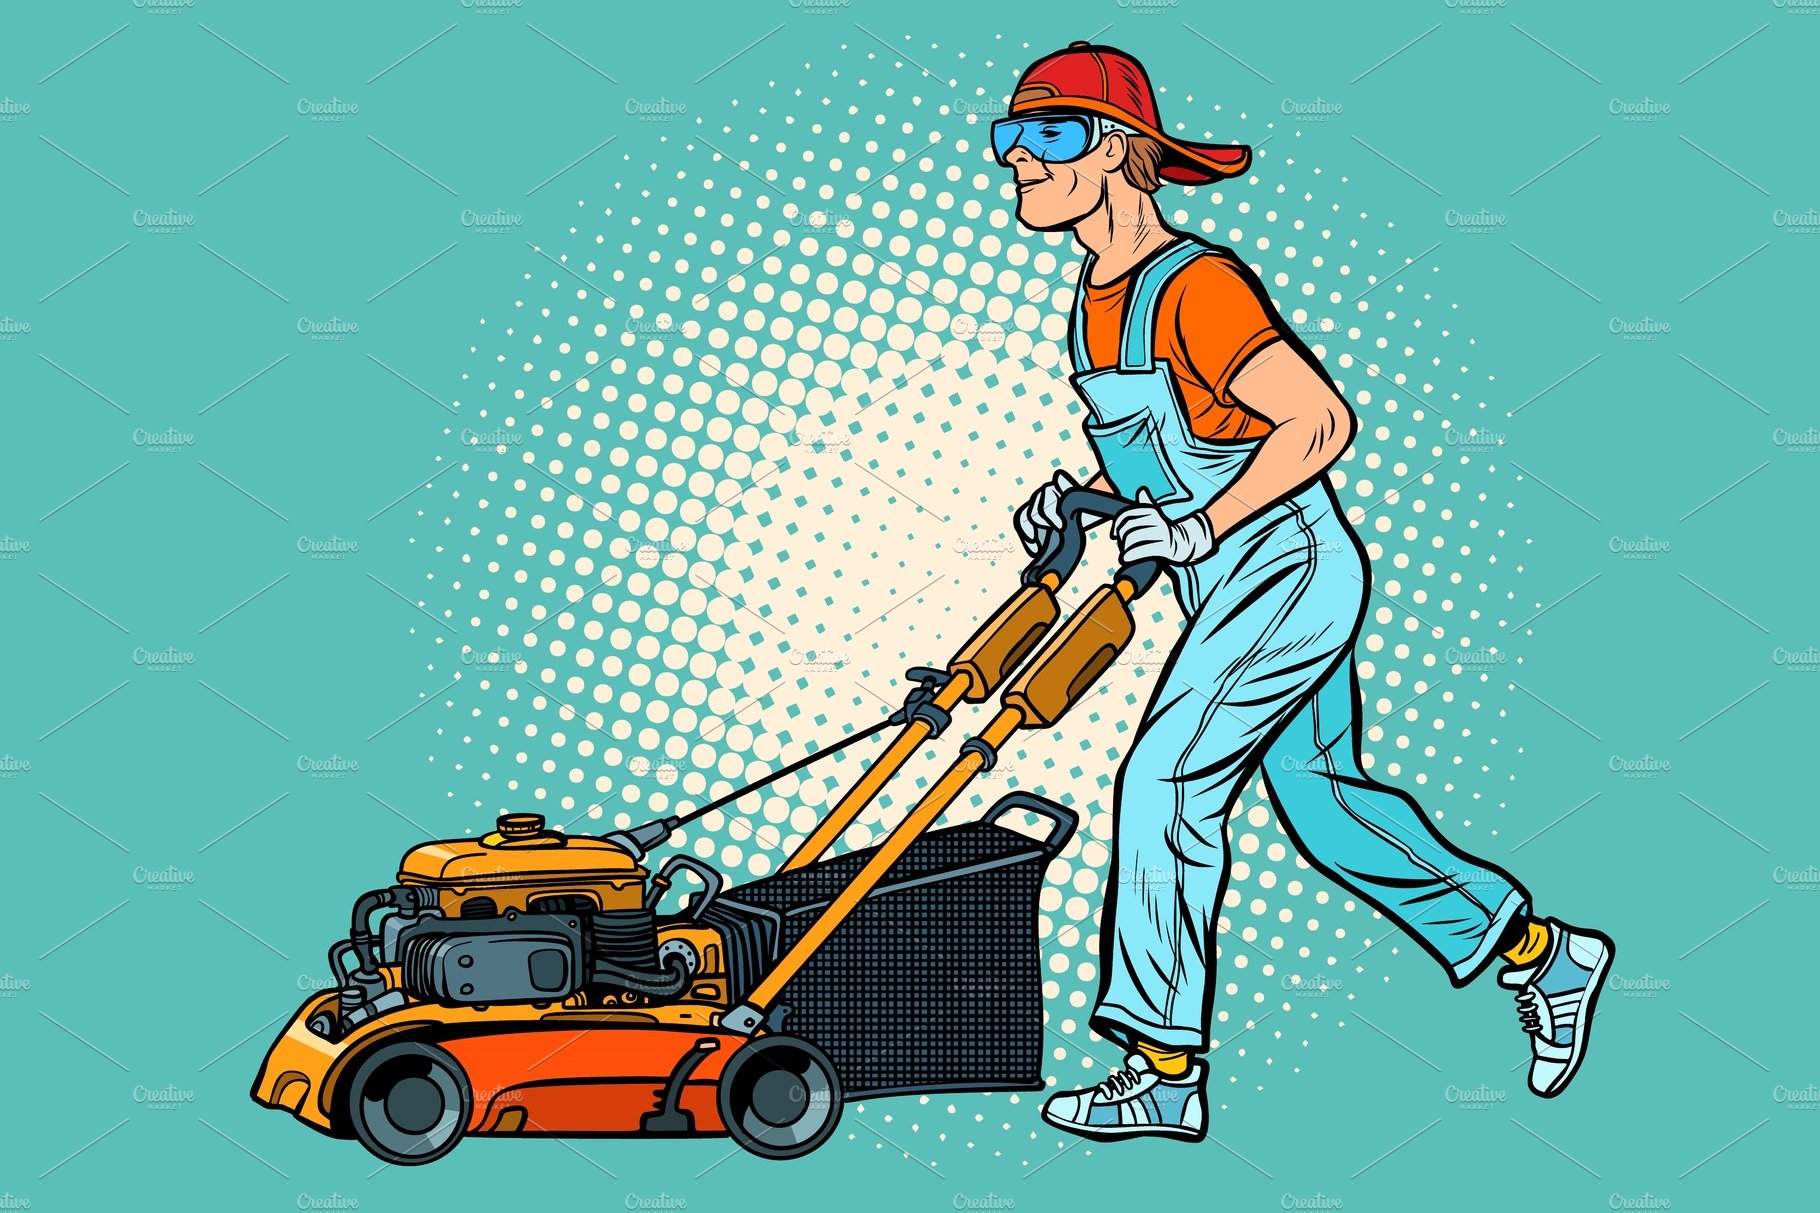 lawn mower worker. Profession and cover image.